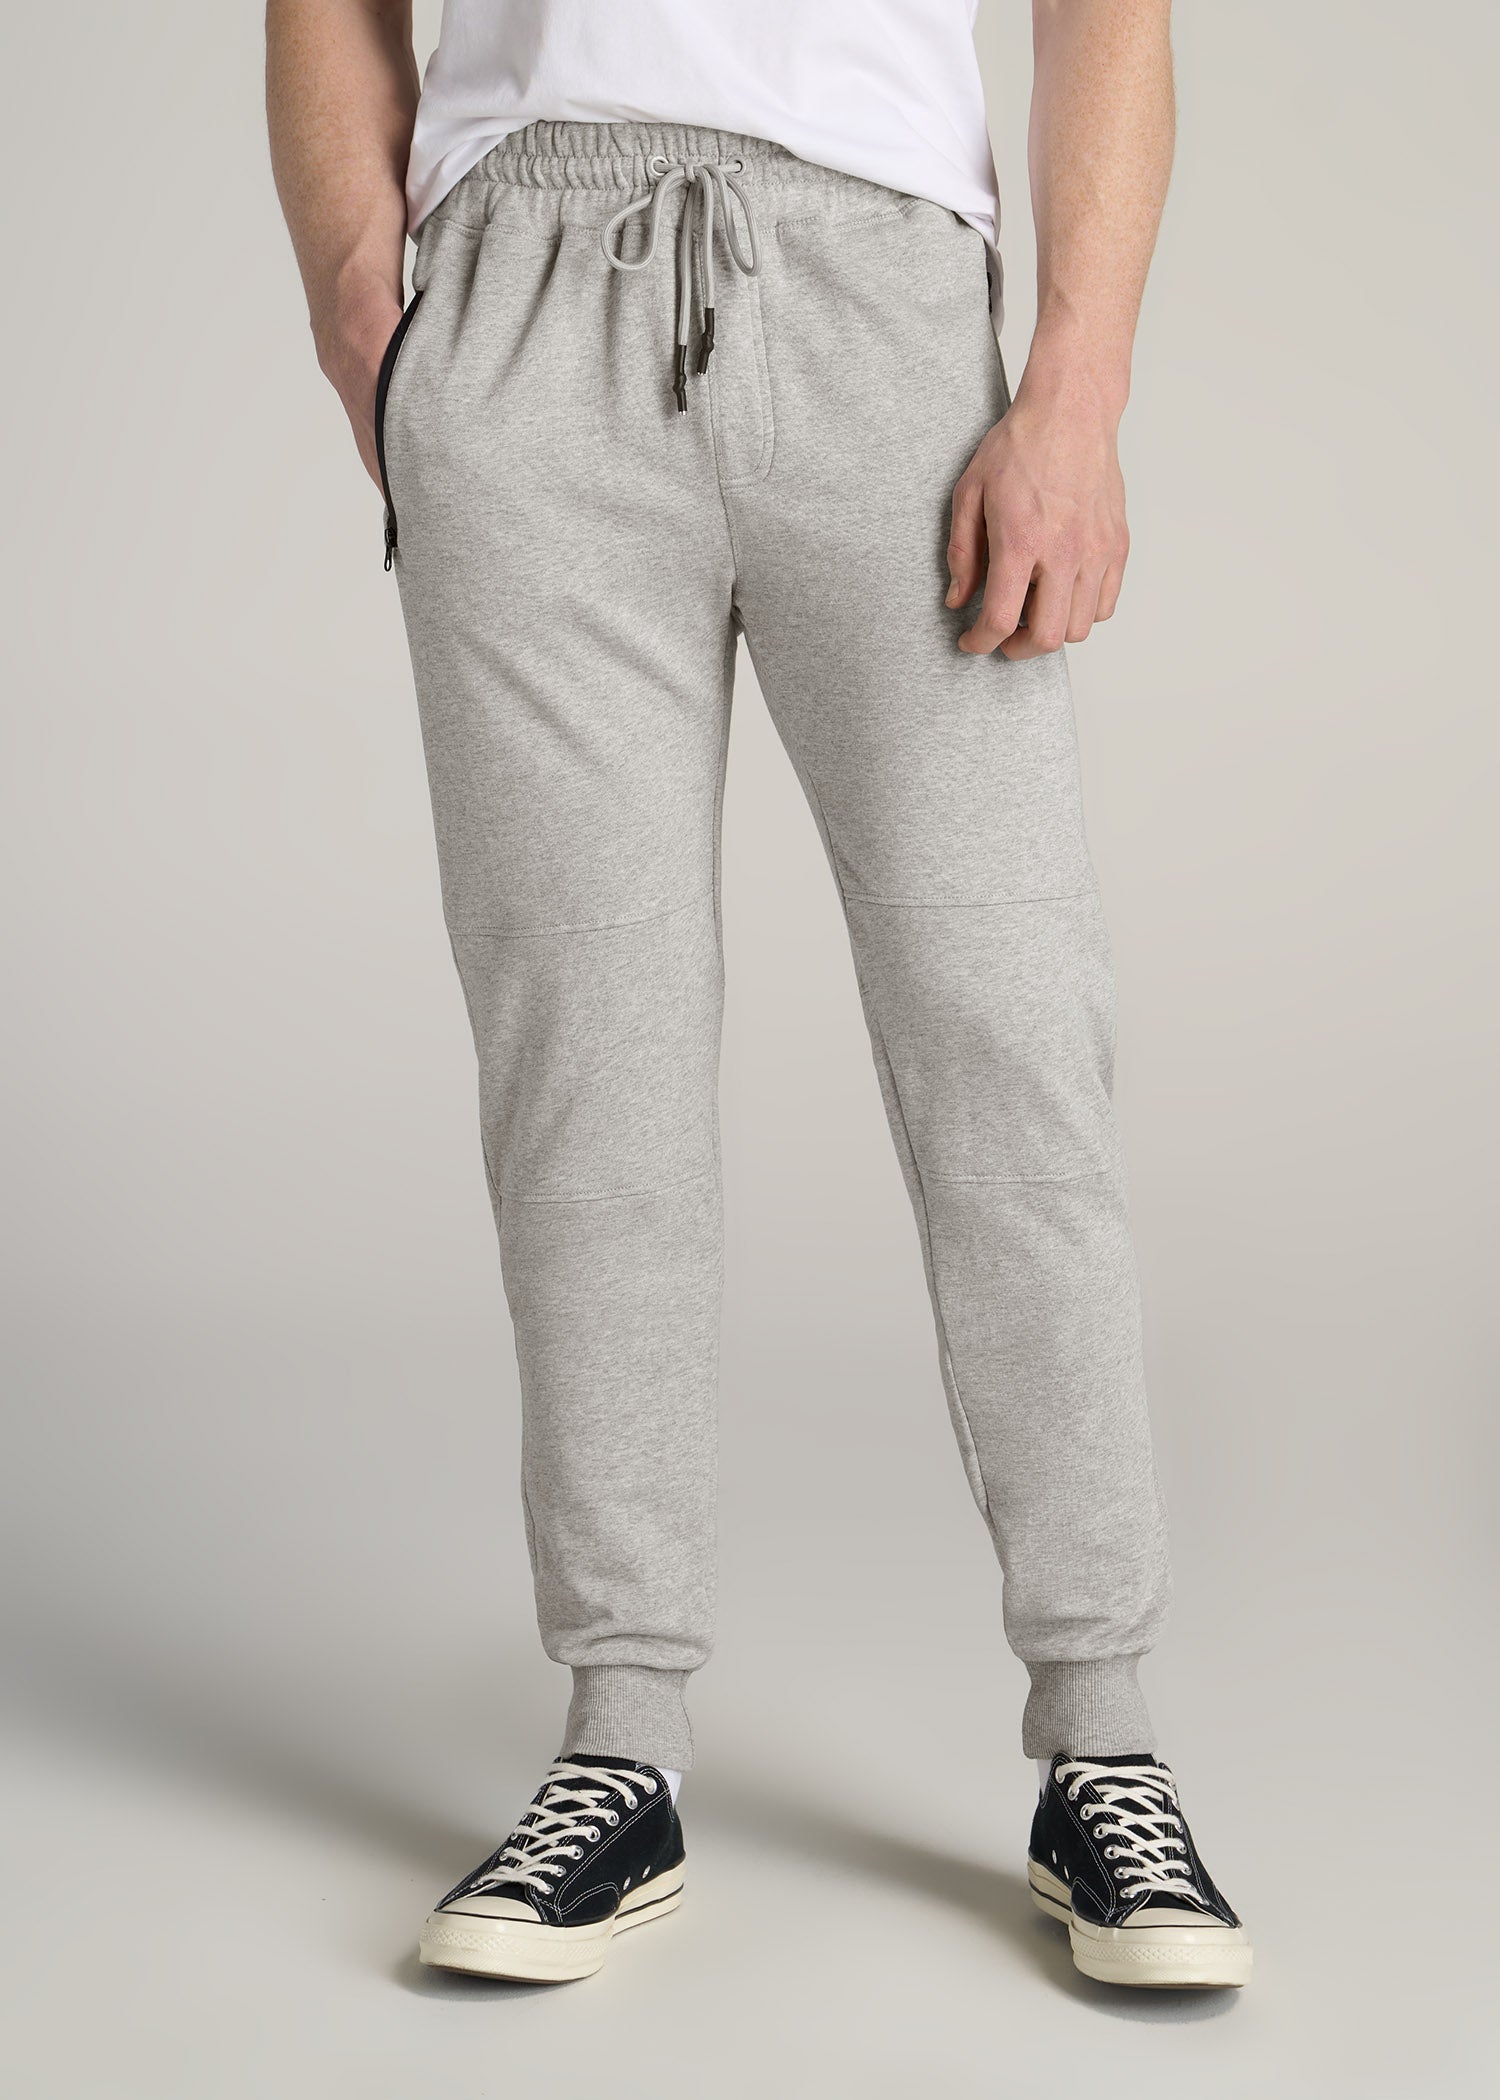 Wearever French Terry Men's Tall Joggers Grey Mix